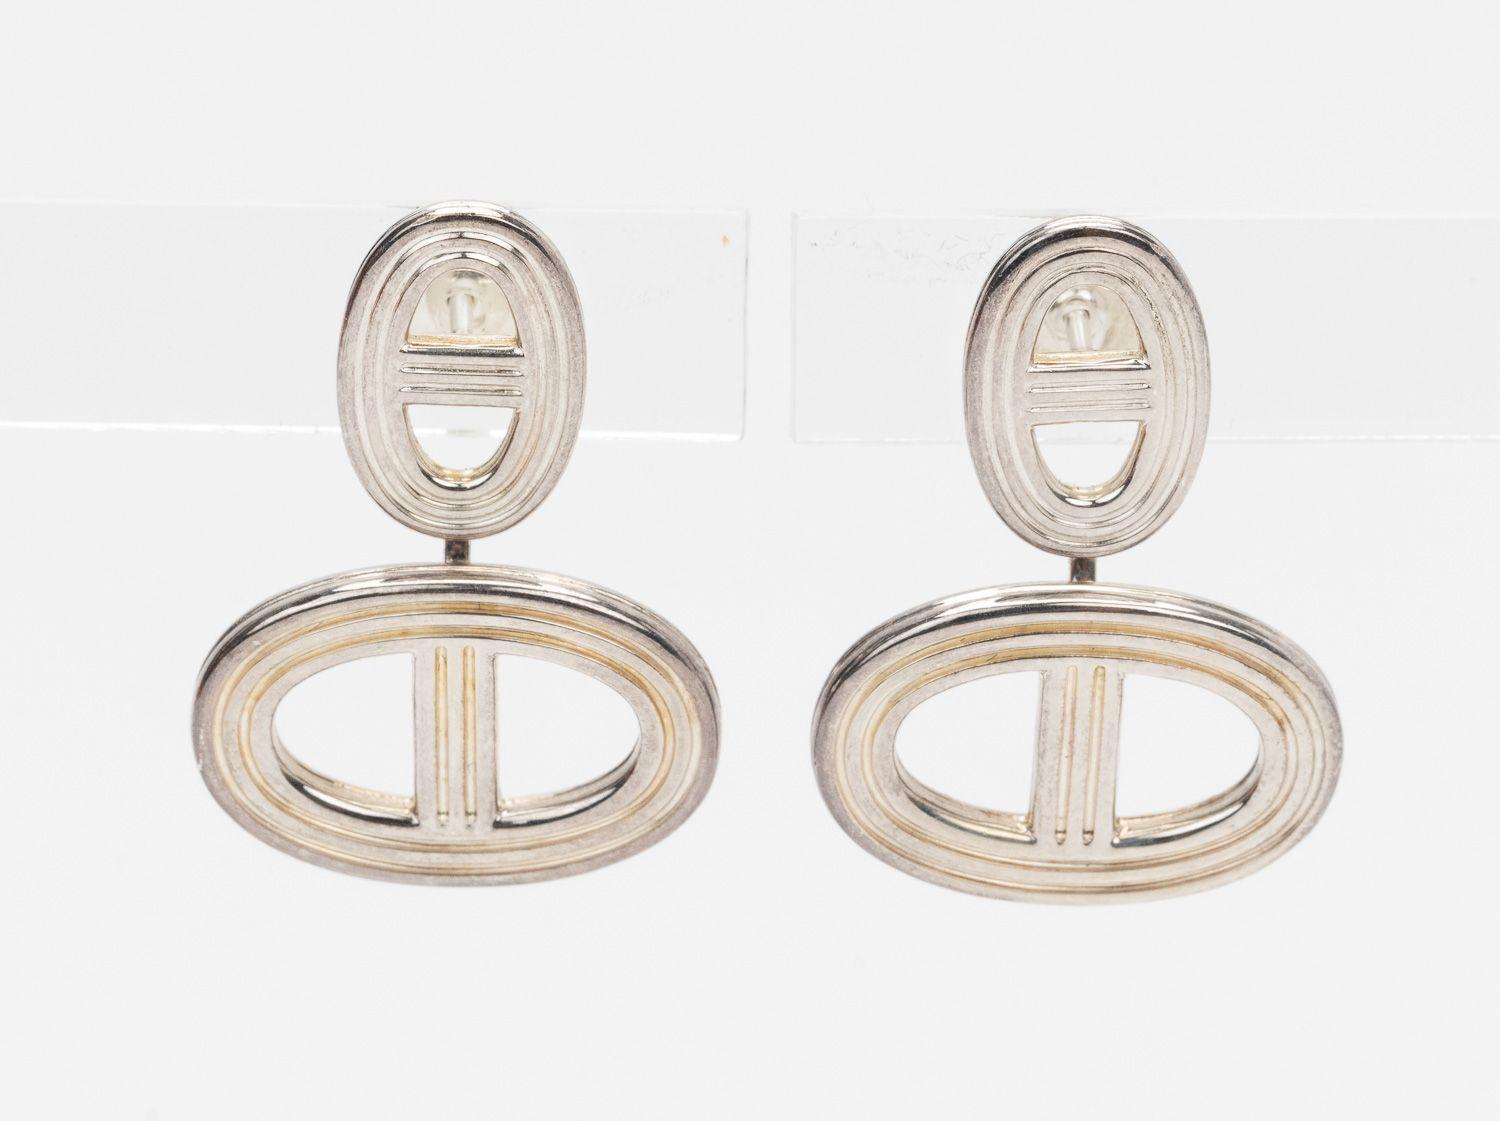 Hermès Chaine D'Ancre Earrings. Crafted in Italy, these elegant earrings are made of 925 Sterling Silver hardware in the unmistakable Hermès Chaine shape with a push back guardian clasp closure.
Total grams 14